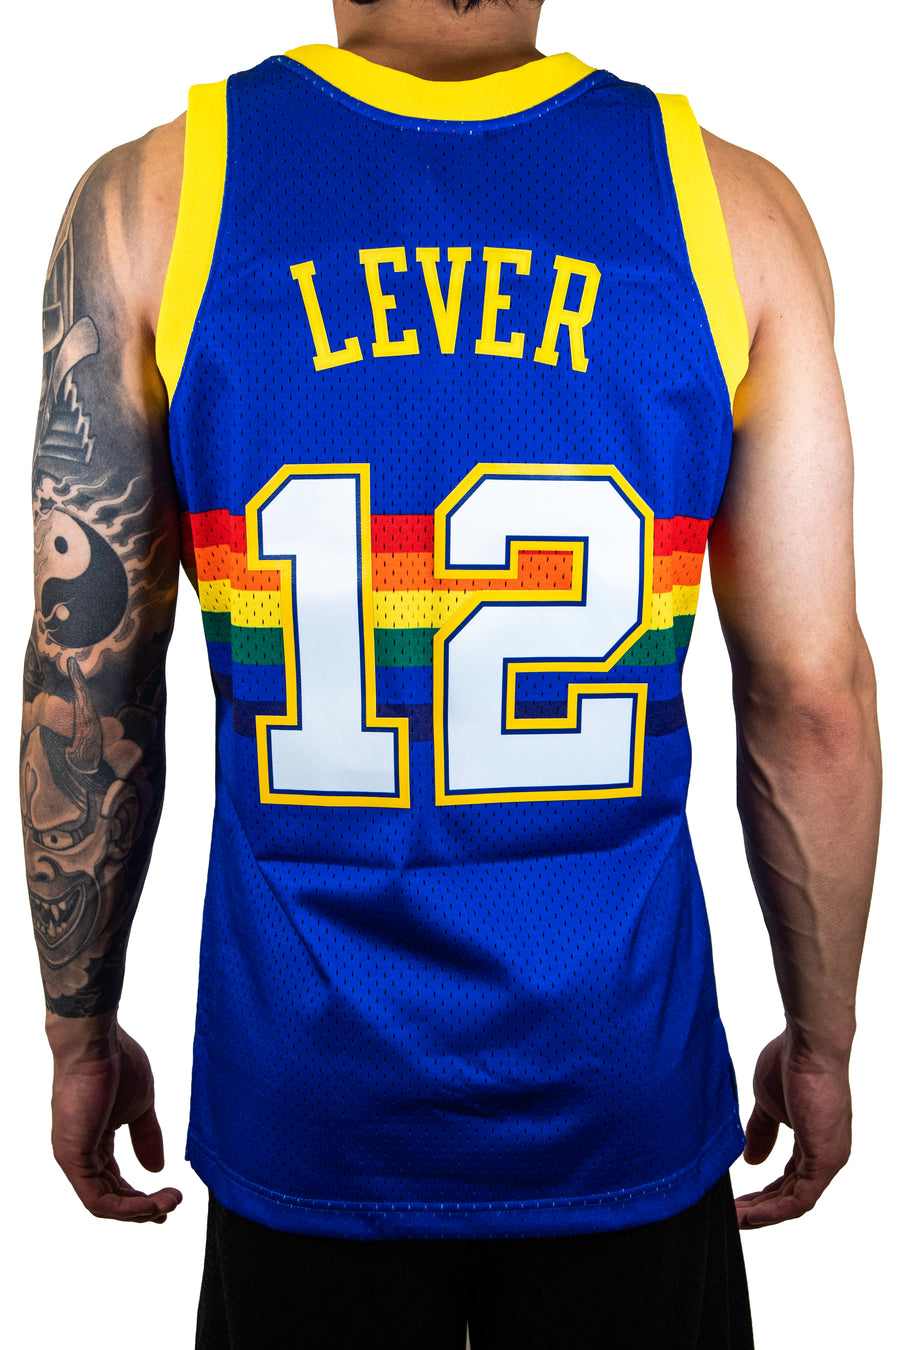 Mitchell & Ness: Hardwood Classic Denver Nuggets Jersey (Lafayette Lever)